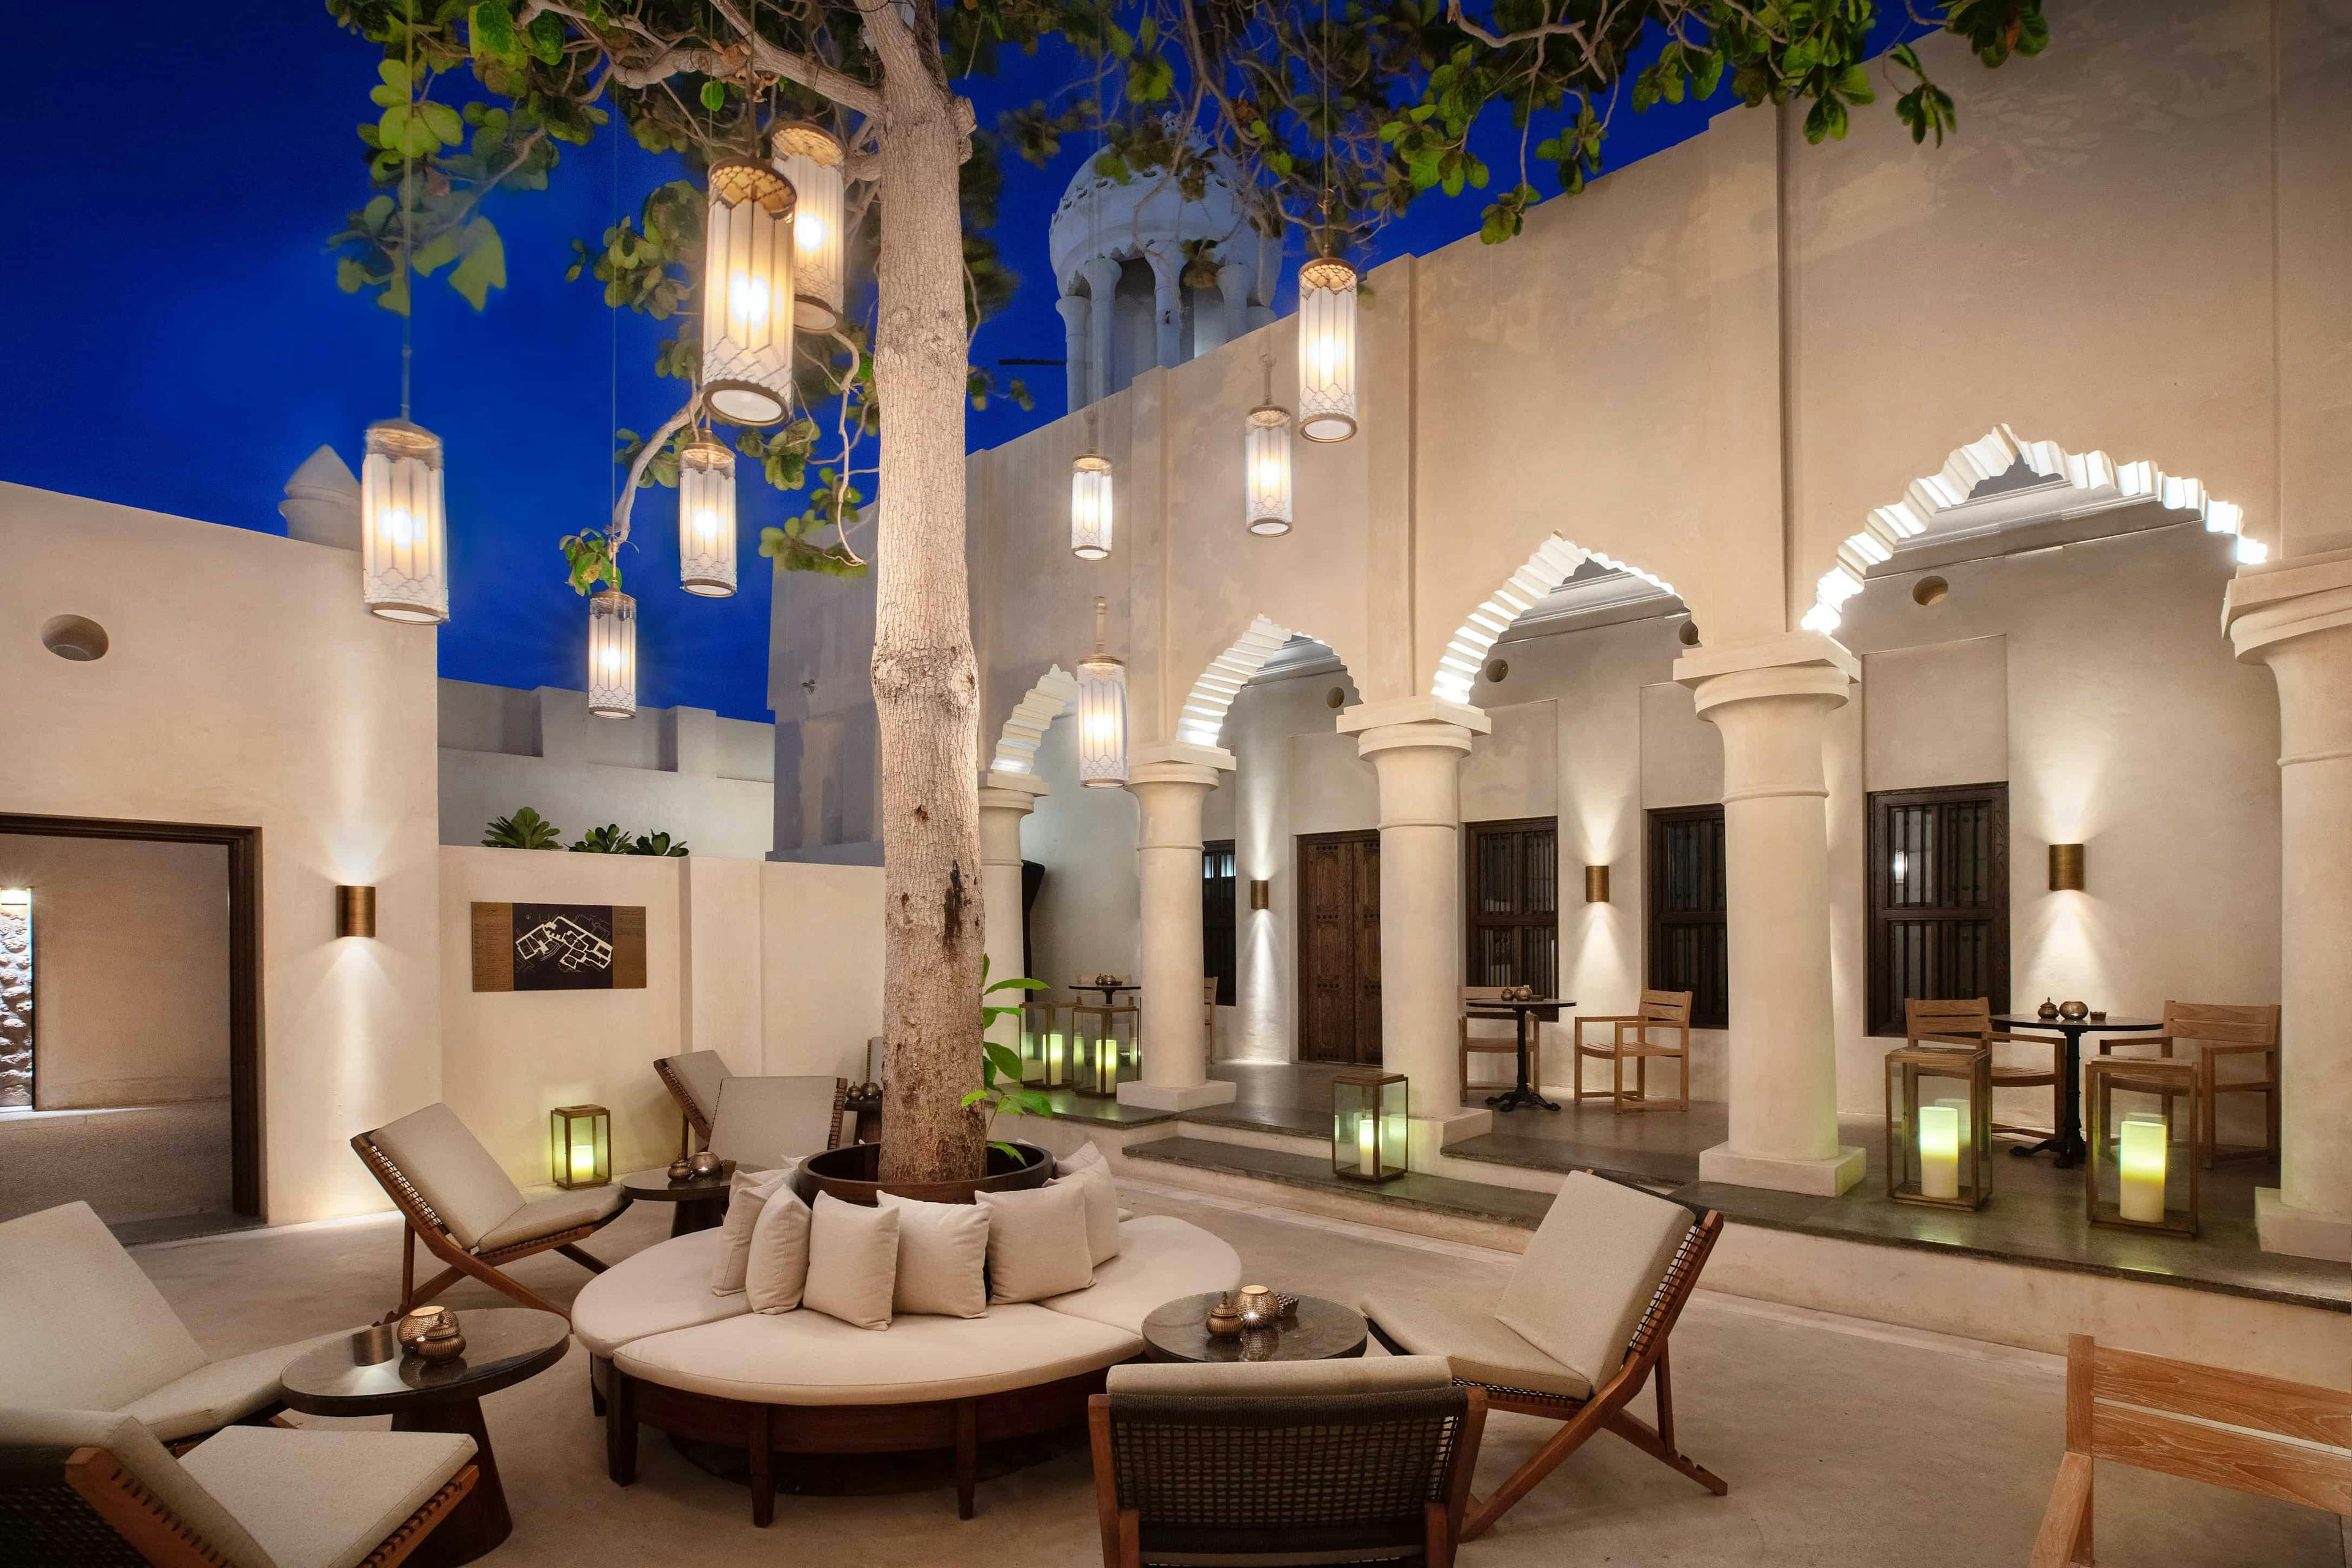 24 hour staycation at The Chedi Al Bait, Sharjah